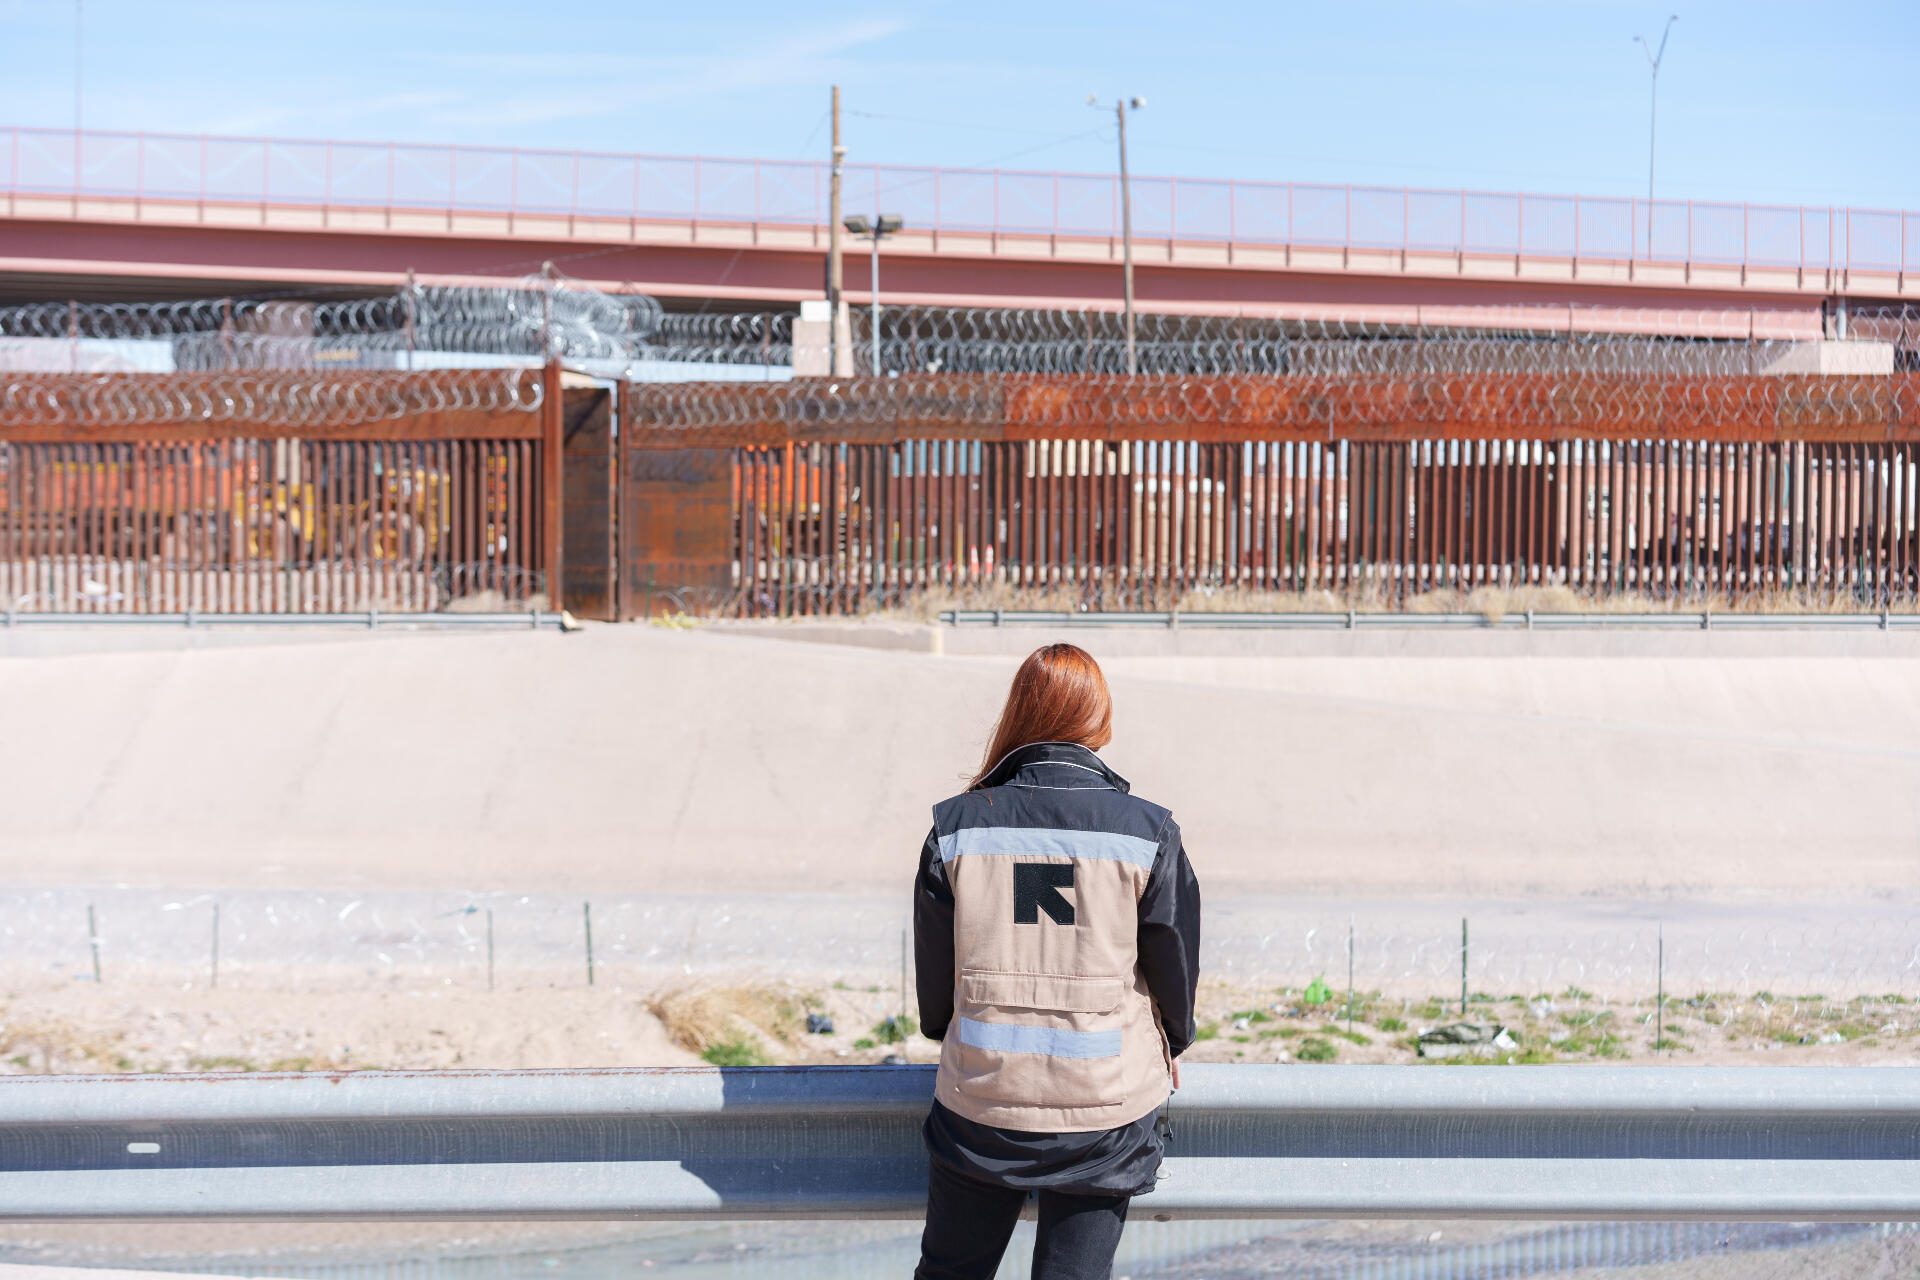 An IRC staff member faces away from the camera and towards the Mexico - U.S. border, while adorning a vest that has the IRC logo on the back.